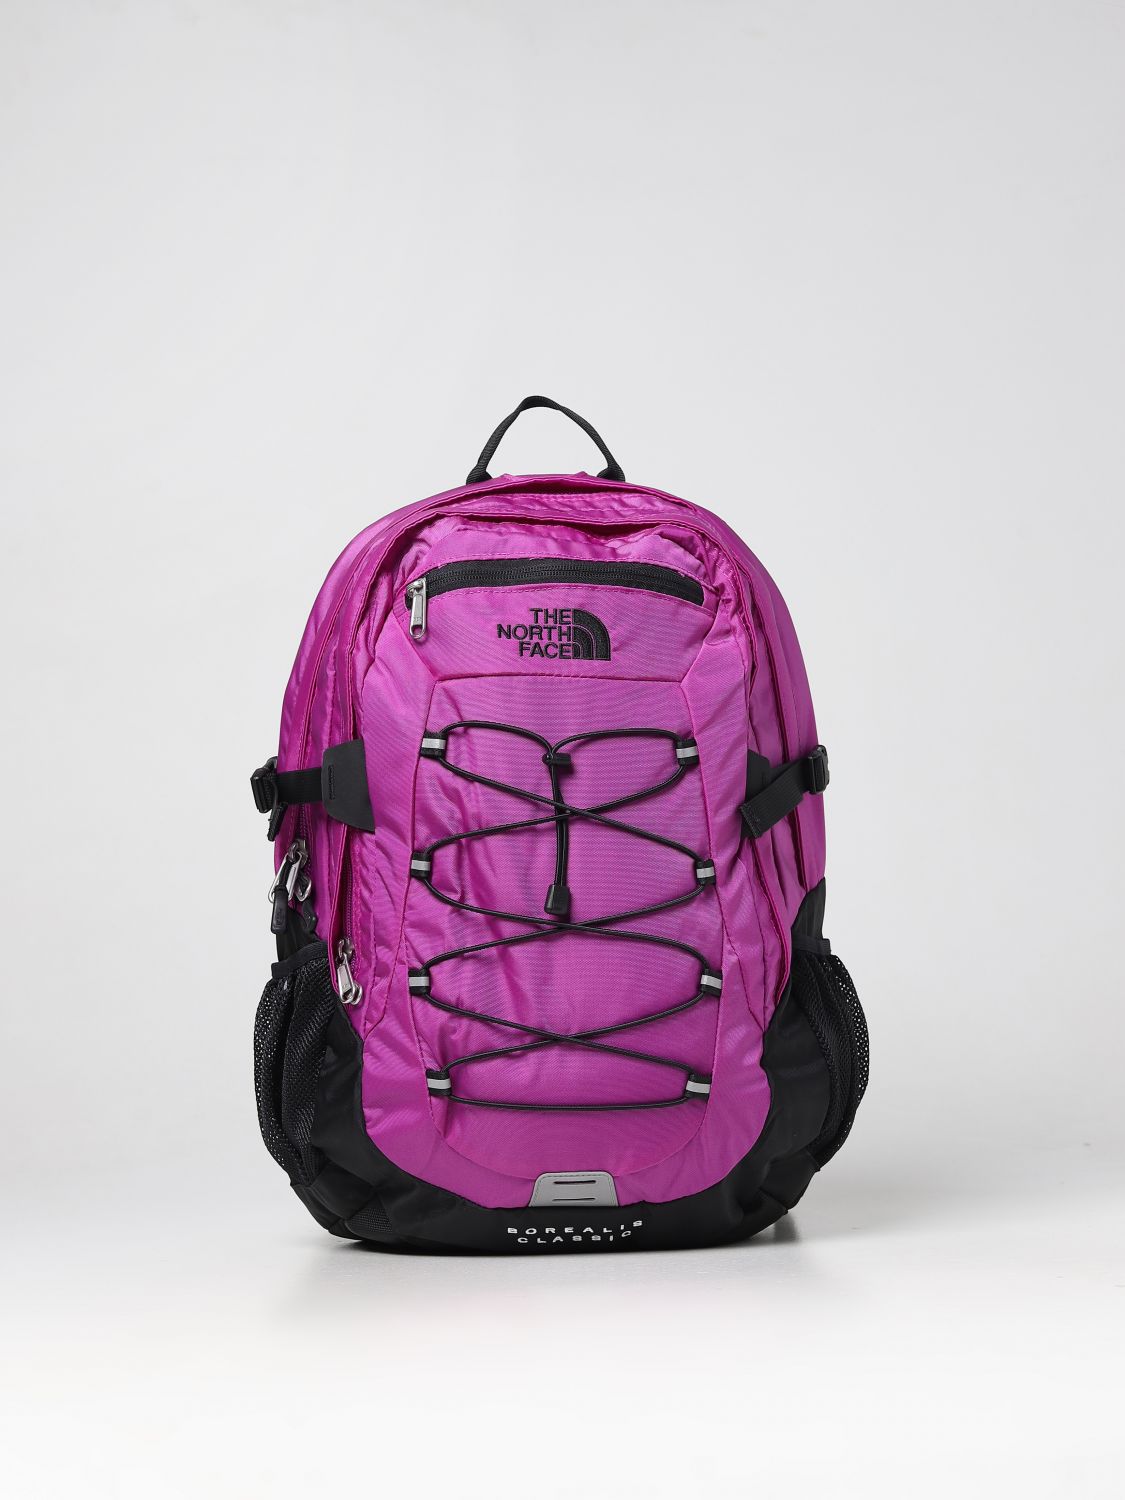 Presentator Aanpassing Previs site THE NORTH FACE: backpack for man - Violet | The North Face backpack  NF00CF9C online on GIGLIO.COM